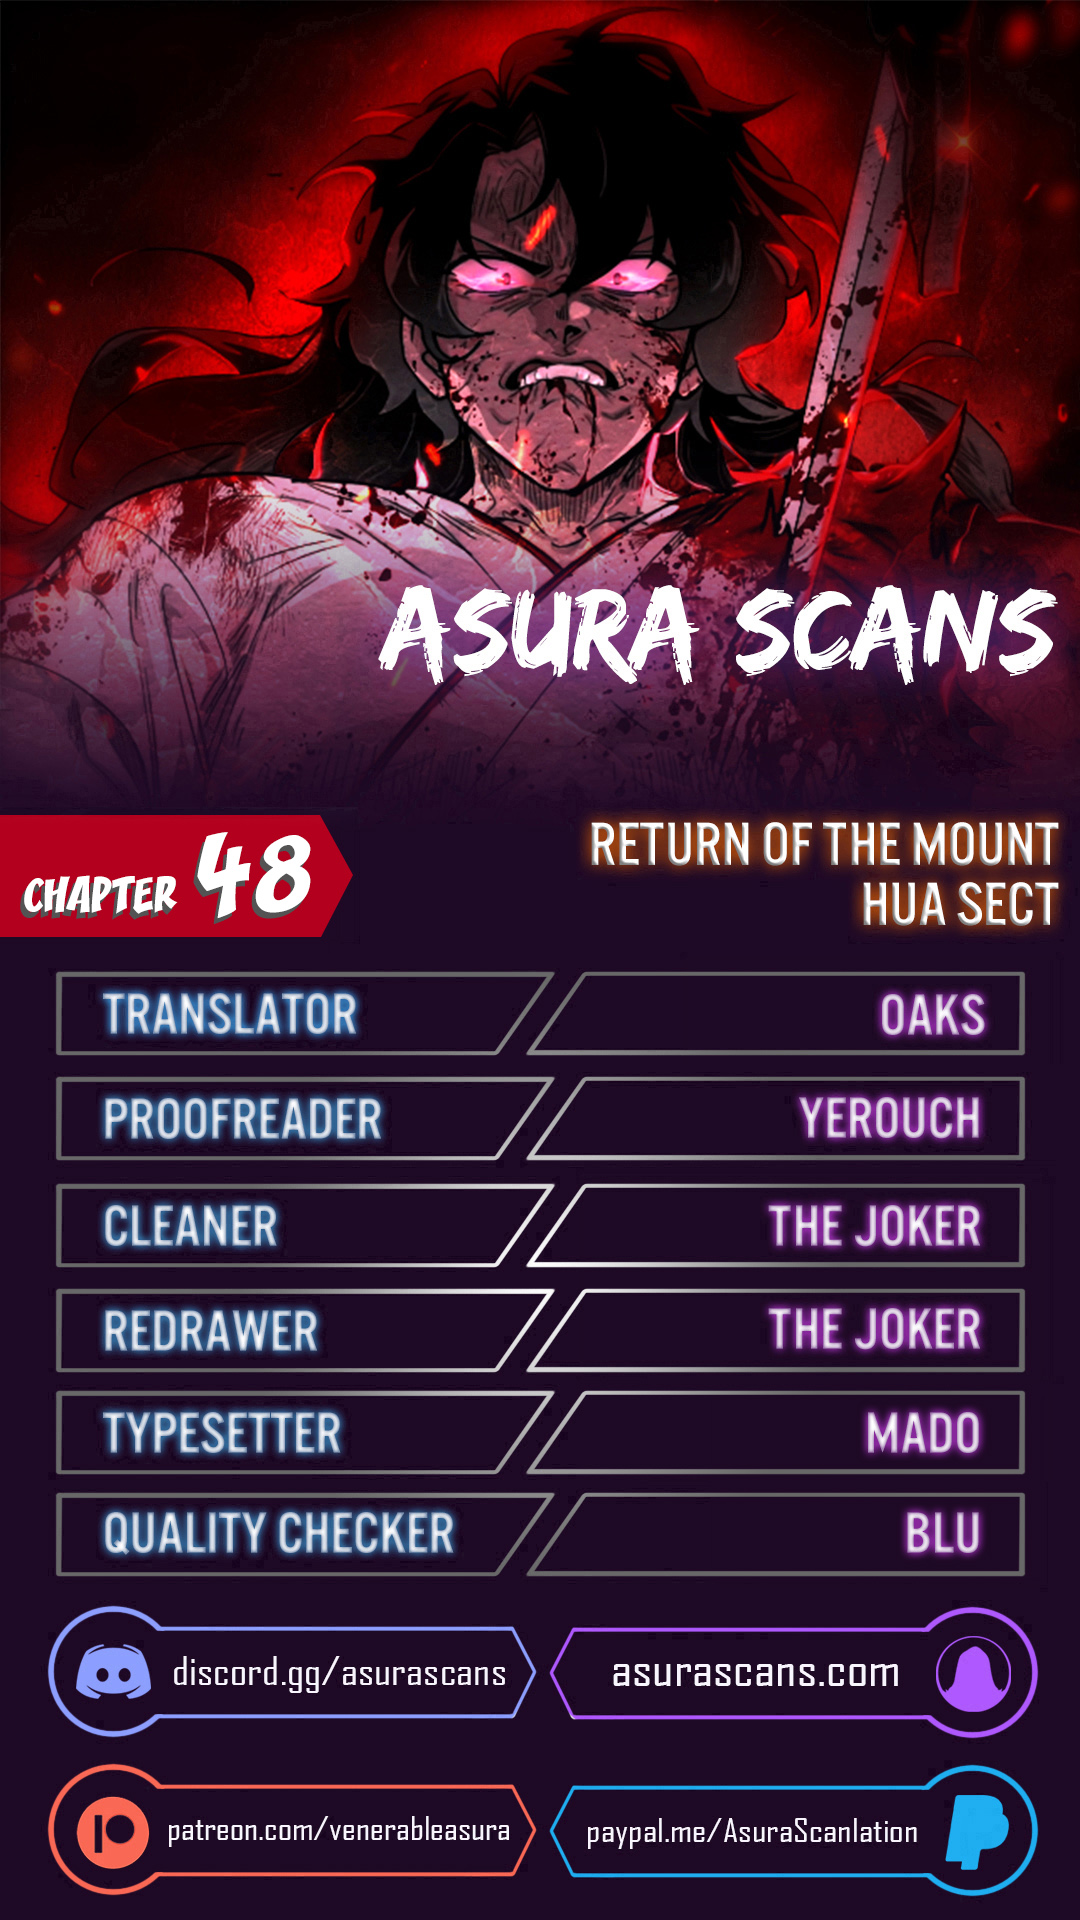 Return of the Mount Hua Sect - Chapter 14269 - Image 1